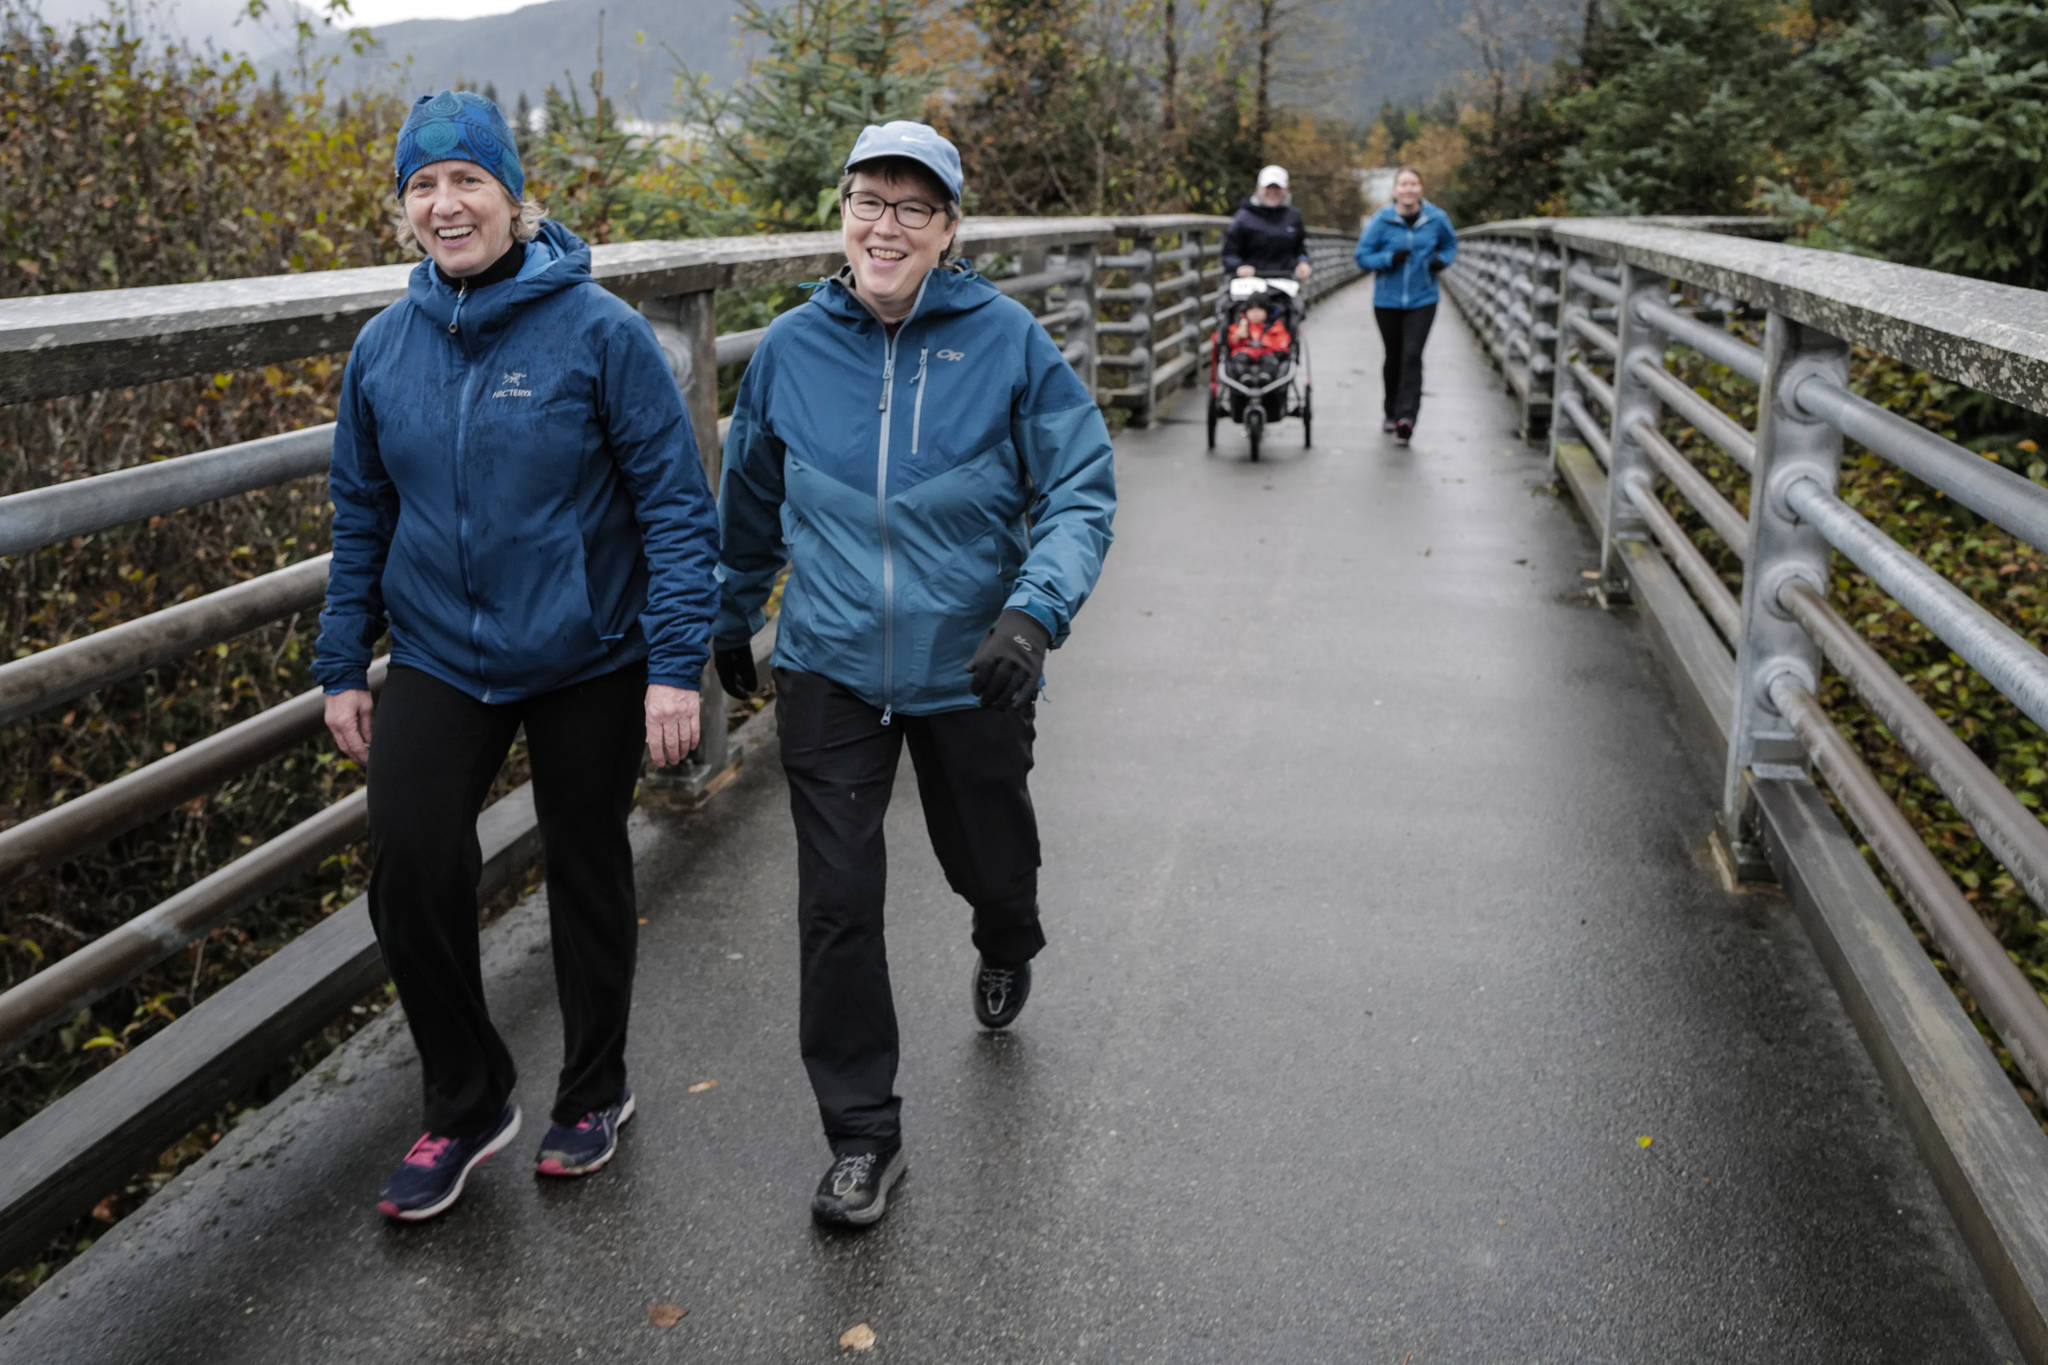 Juneau residents participate in the annual community mental health run, the Extra Tough 5K & 1 Mile Run, on Saturday, Oct. 12, 2019, starting at Riverbend Elementary School. The run is sponsored by National Alliance on Mental Illness (NAMI) Juneau. (Michael Penn | Juneau Empire)